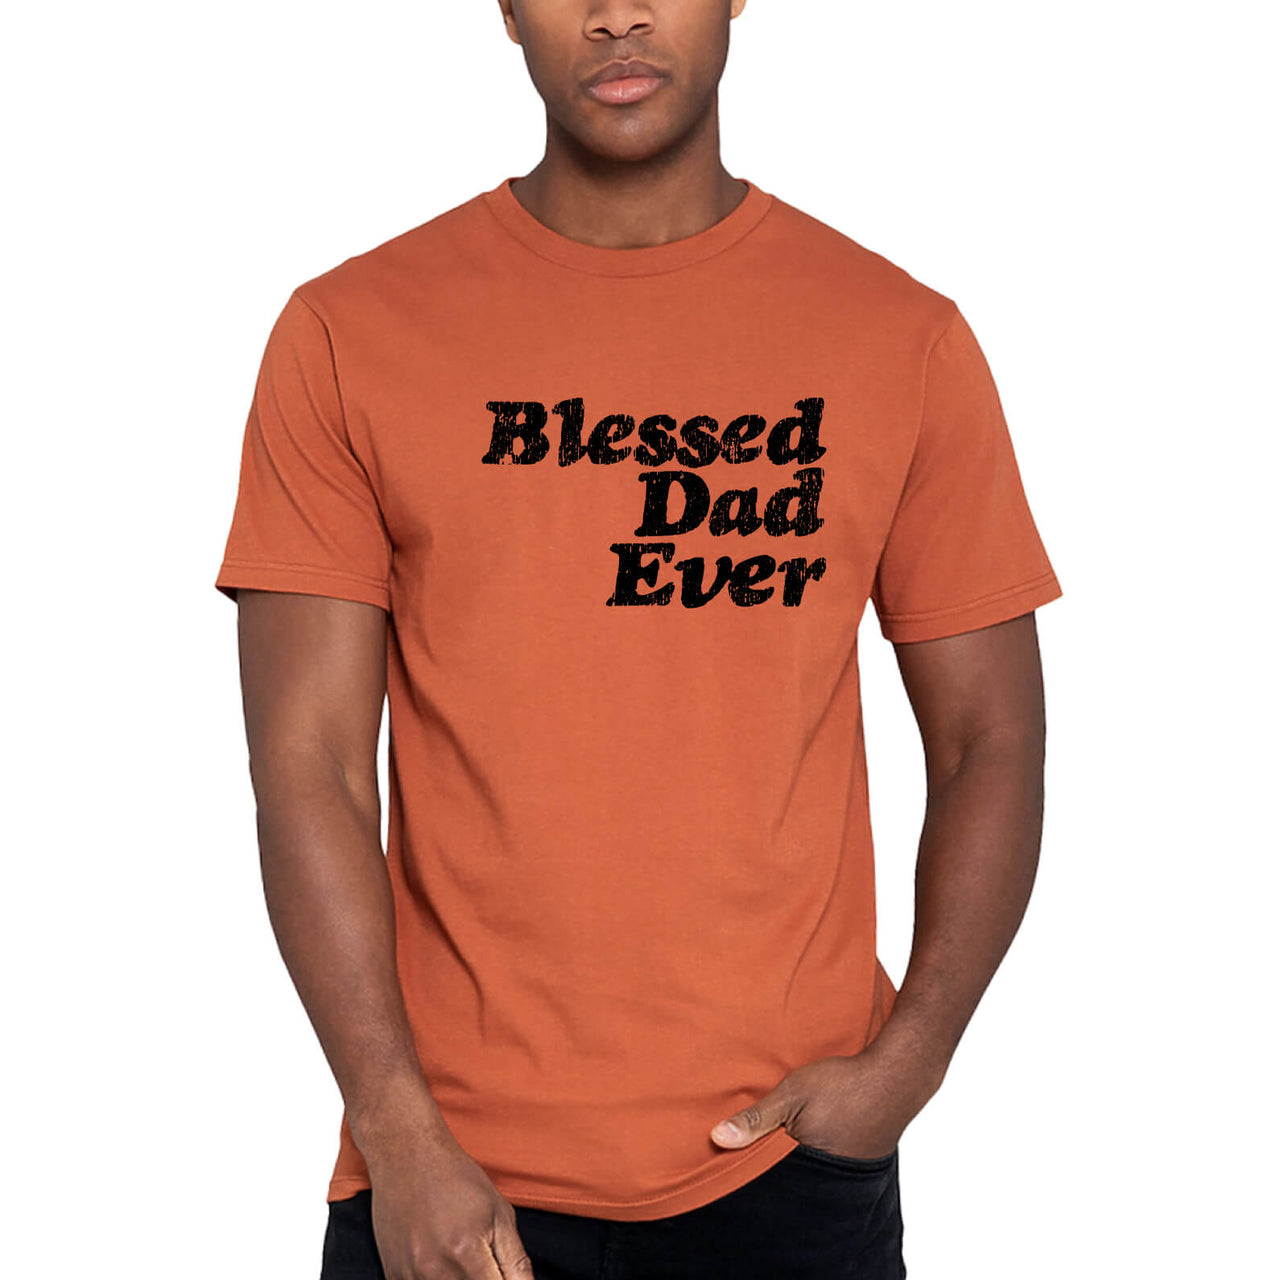 Blessed Dad Ever Men's T-Shirt